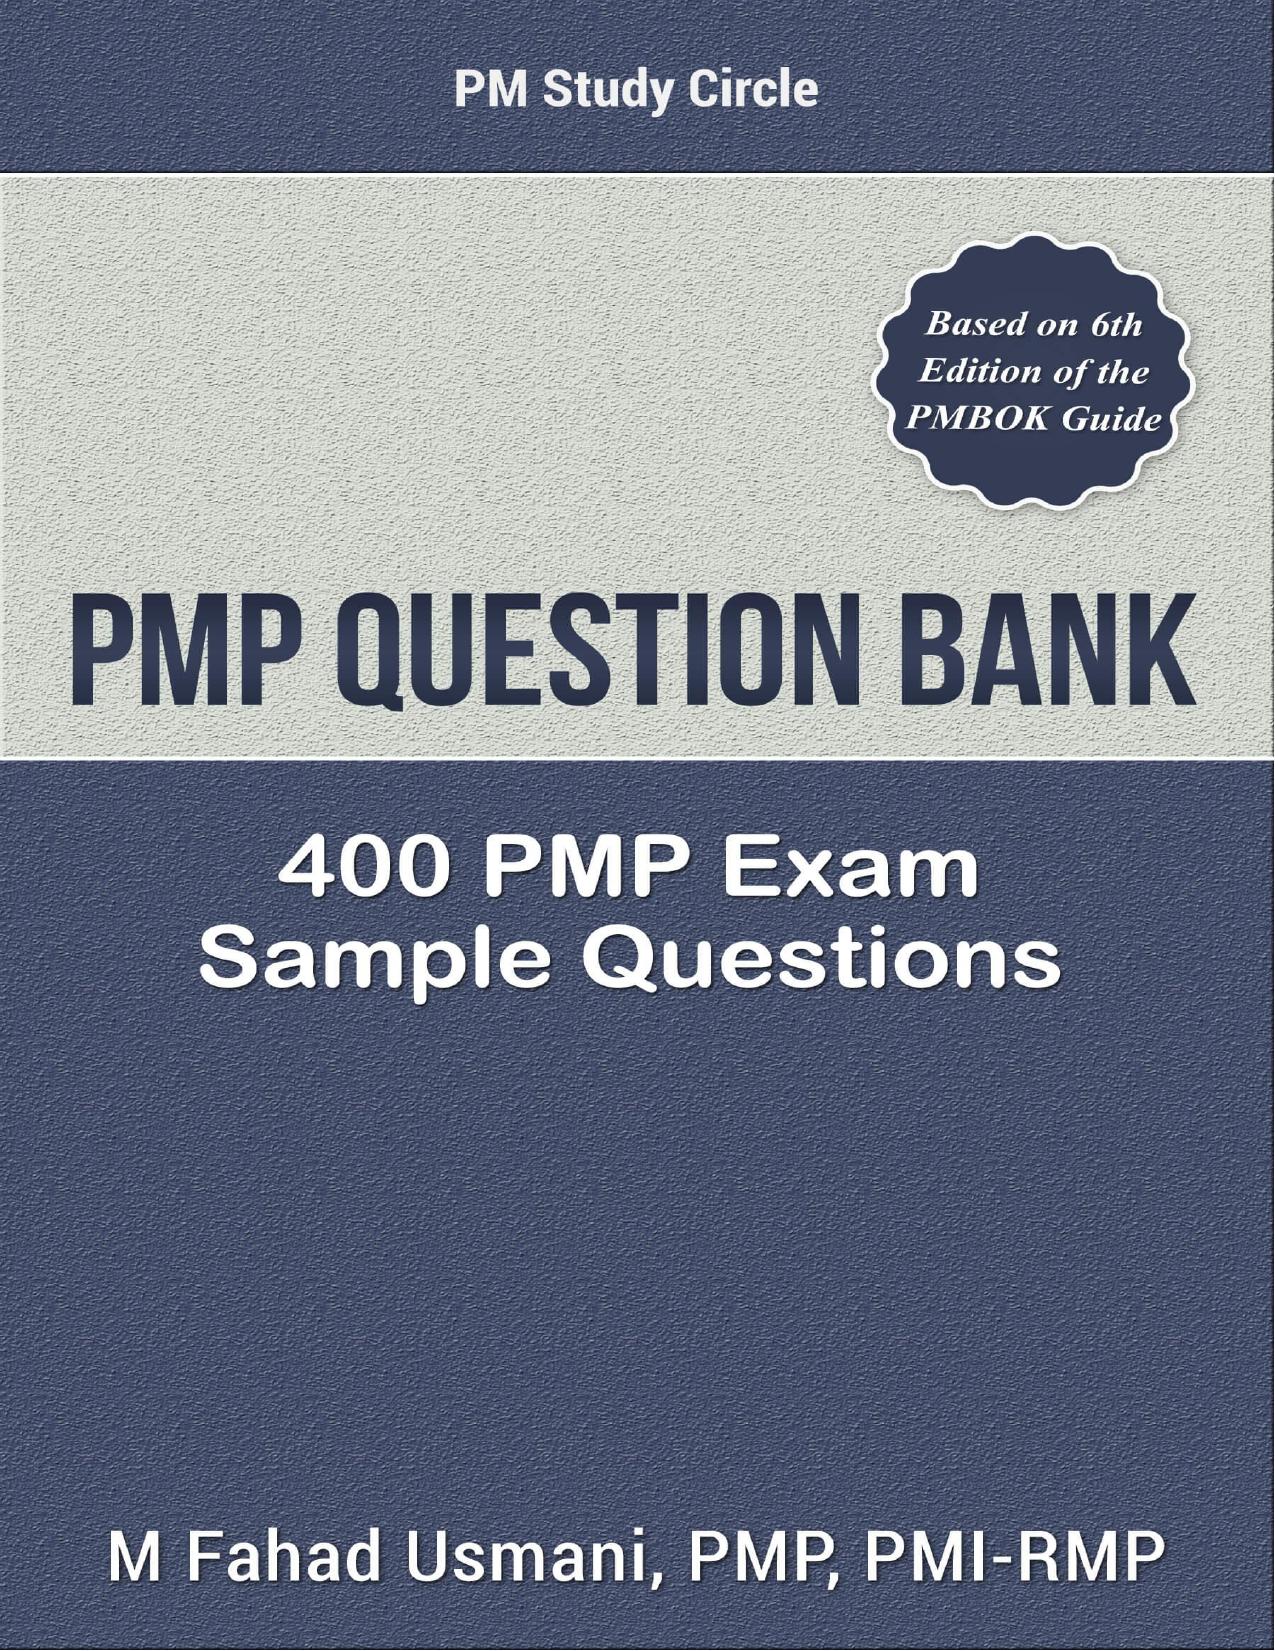 PMP® Question Bank - 400 PMP®P Exam Sample Questions